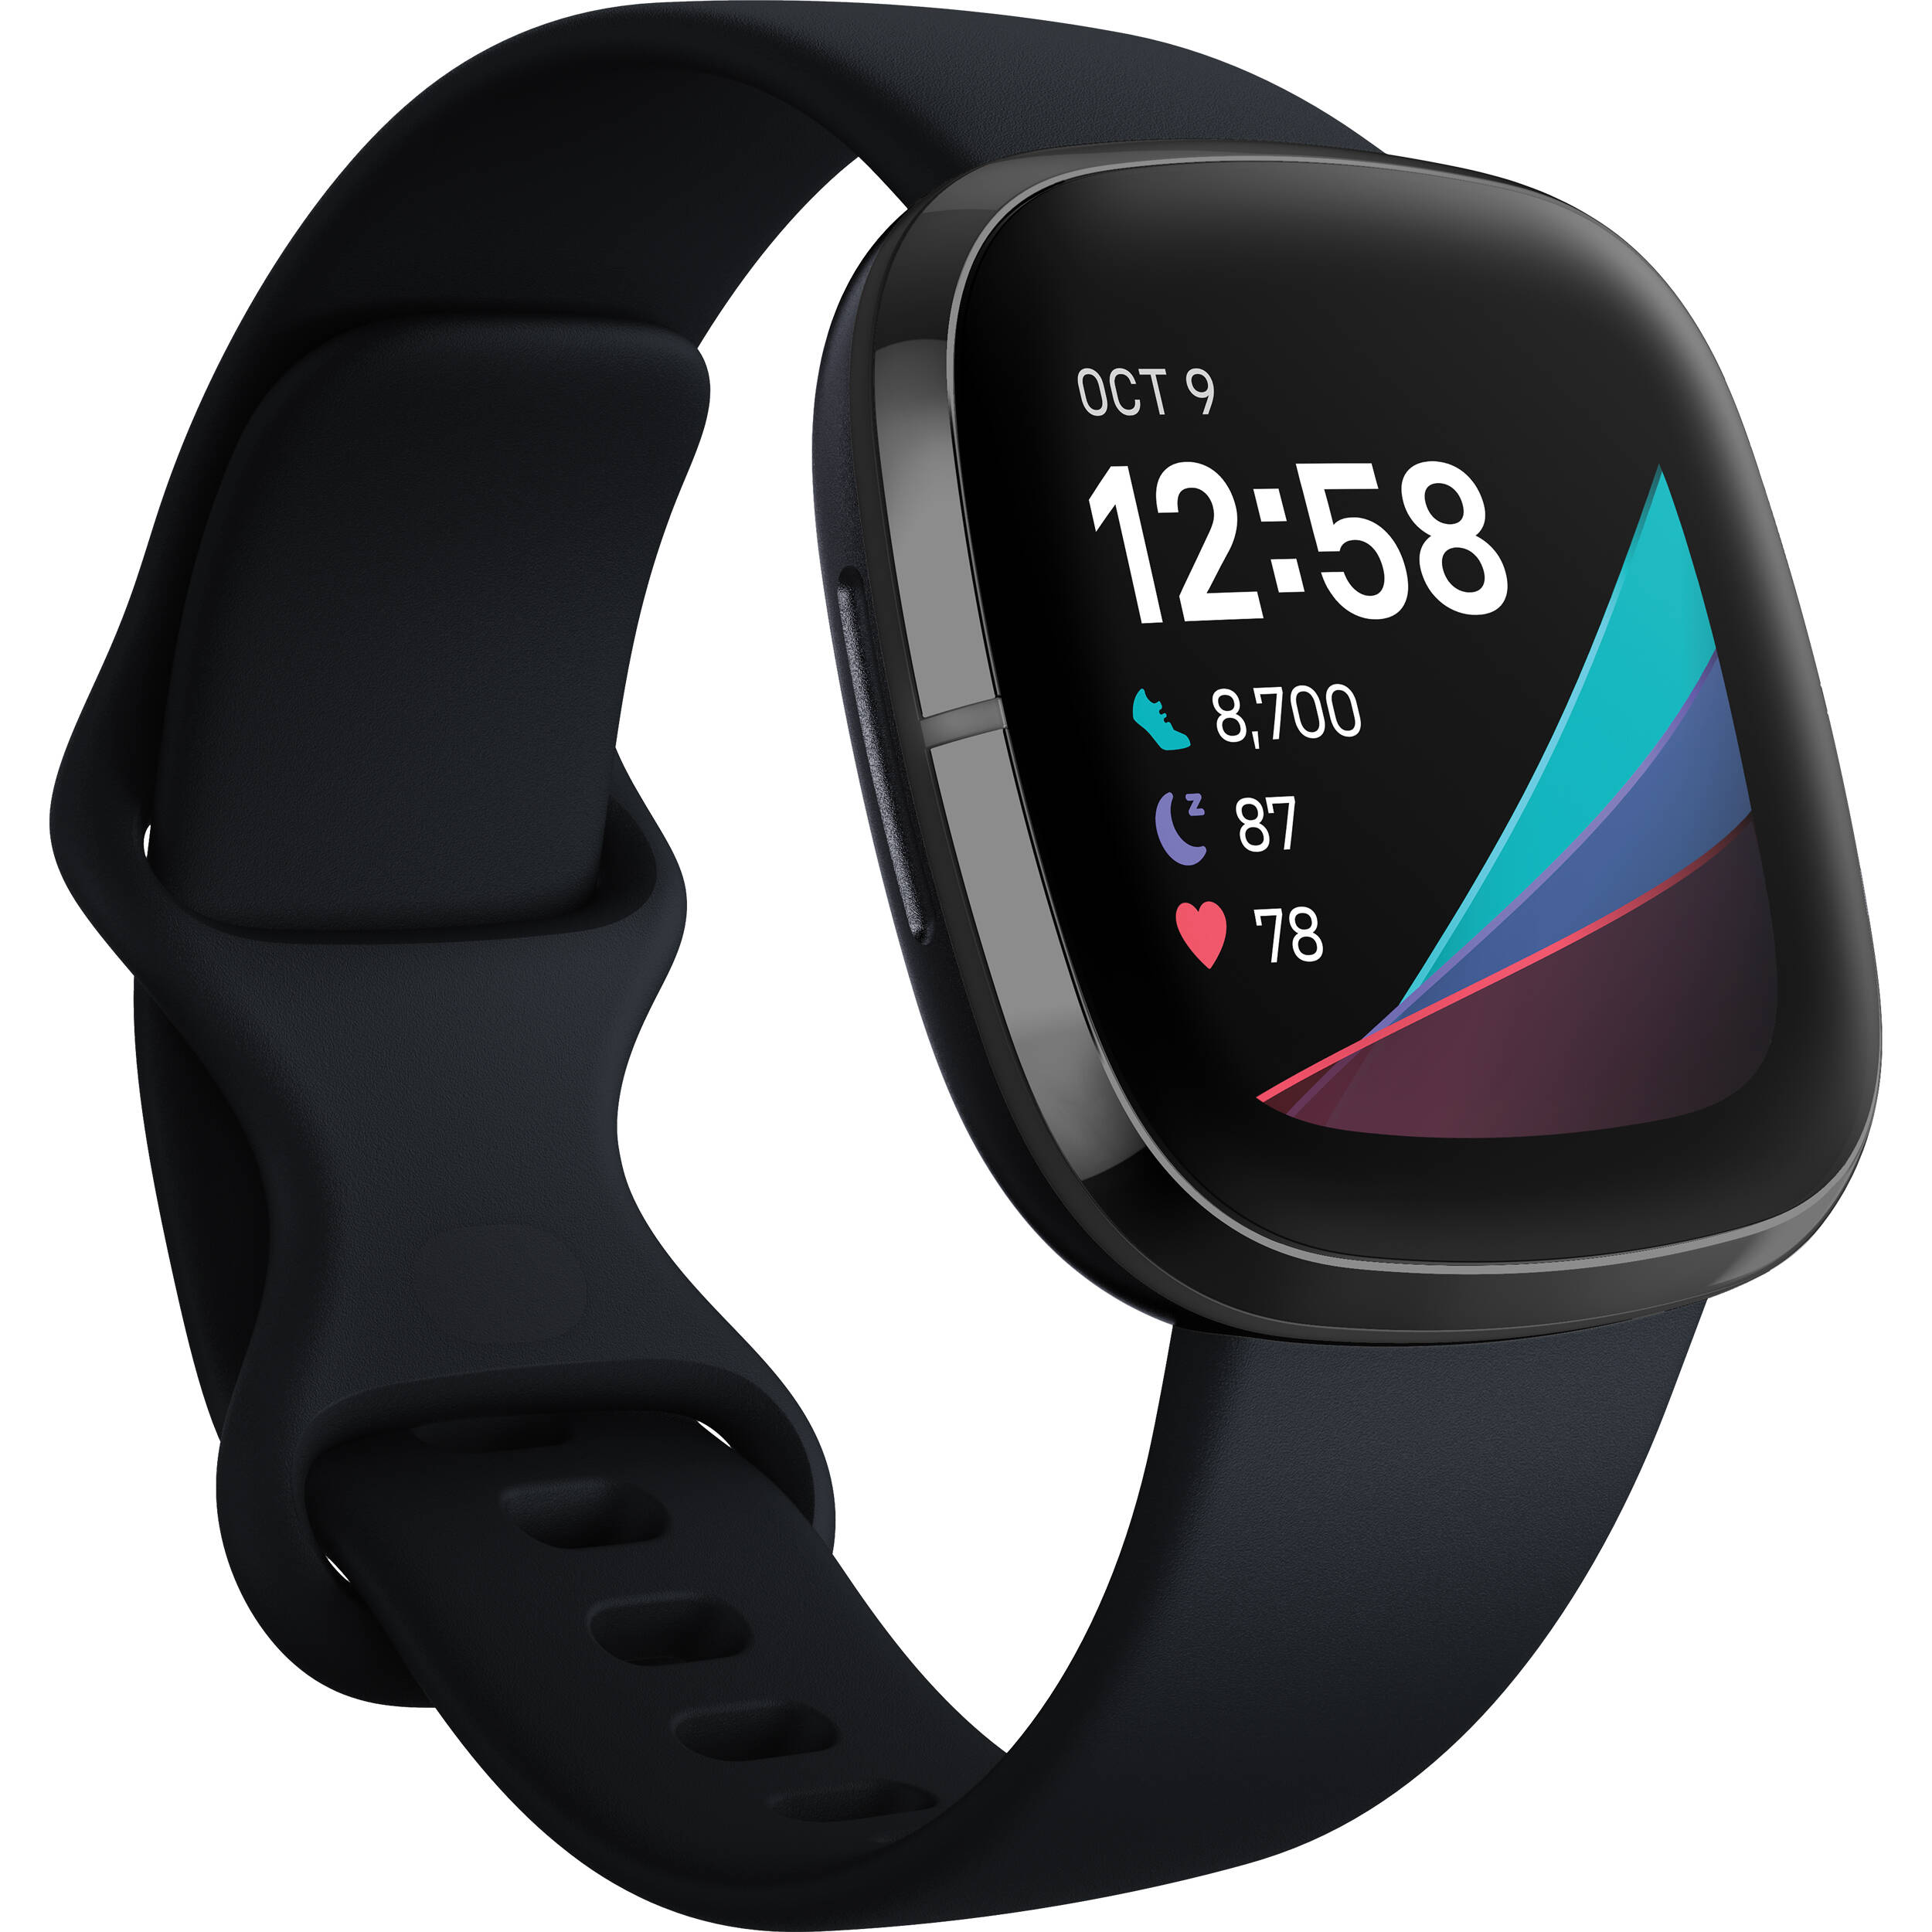 which fitbit has a gps tracker